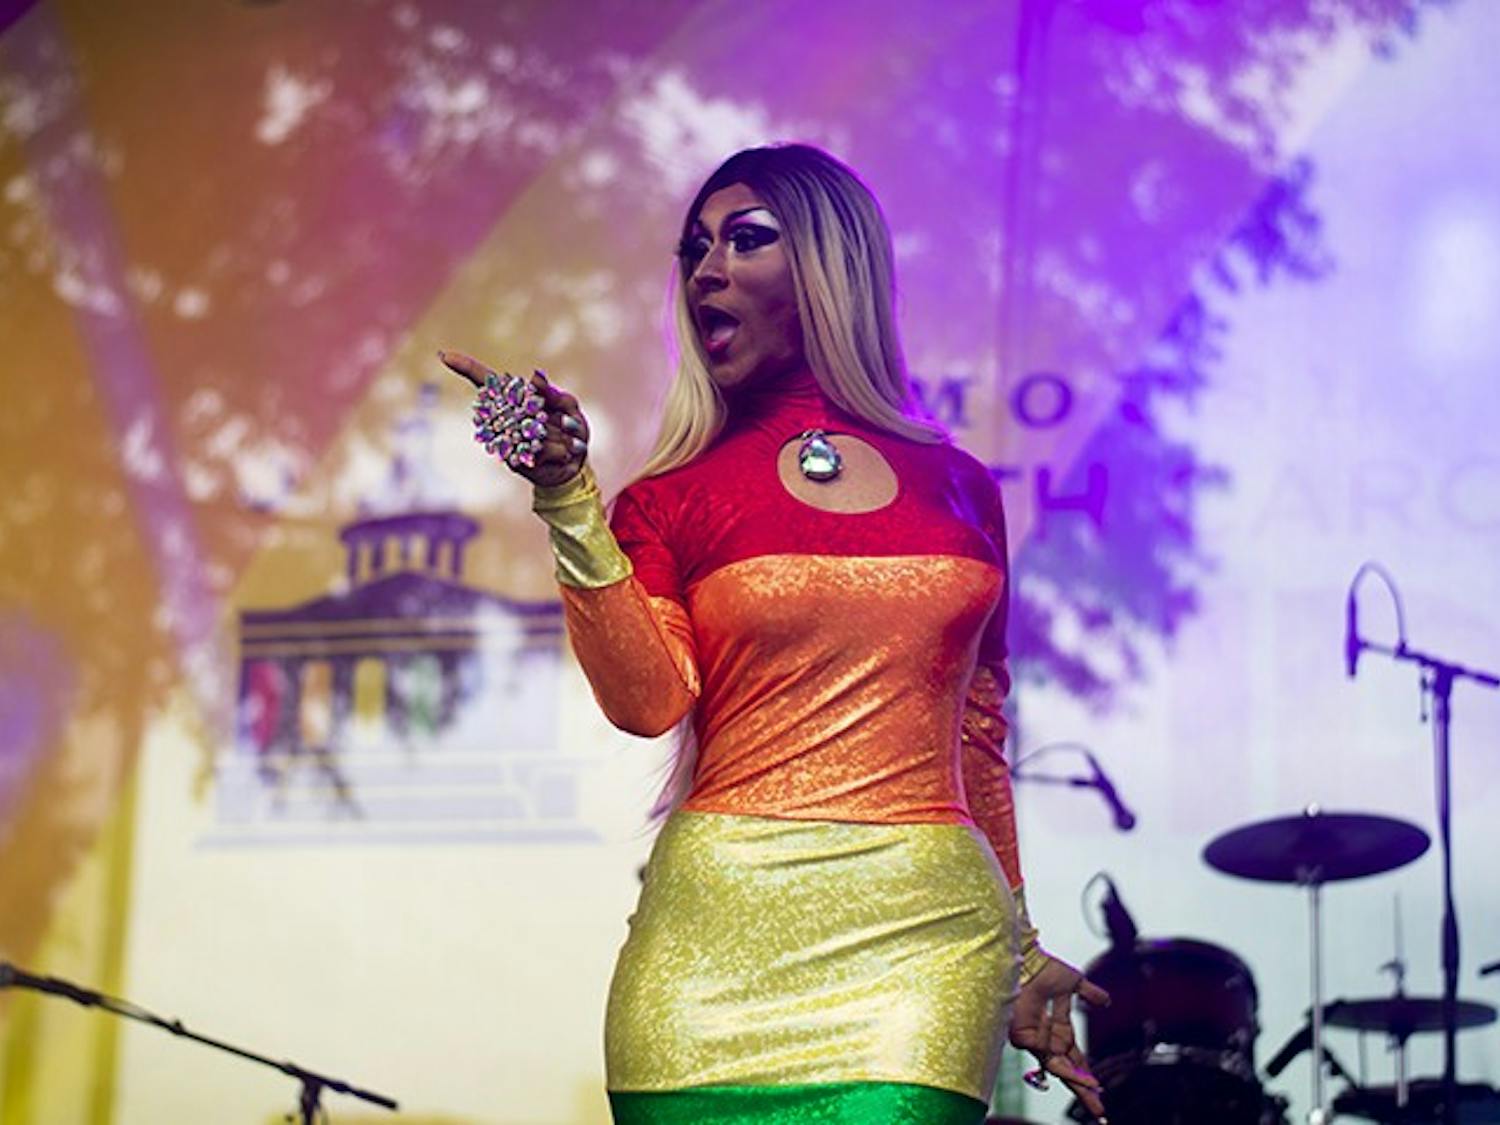 Local drag queen Princess Mocha performs at the Famously Hot South Carolina Pride Festival on Oct. 5th.